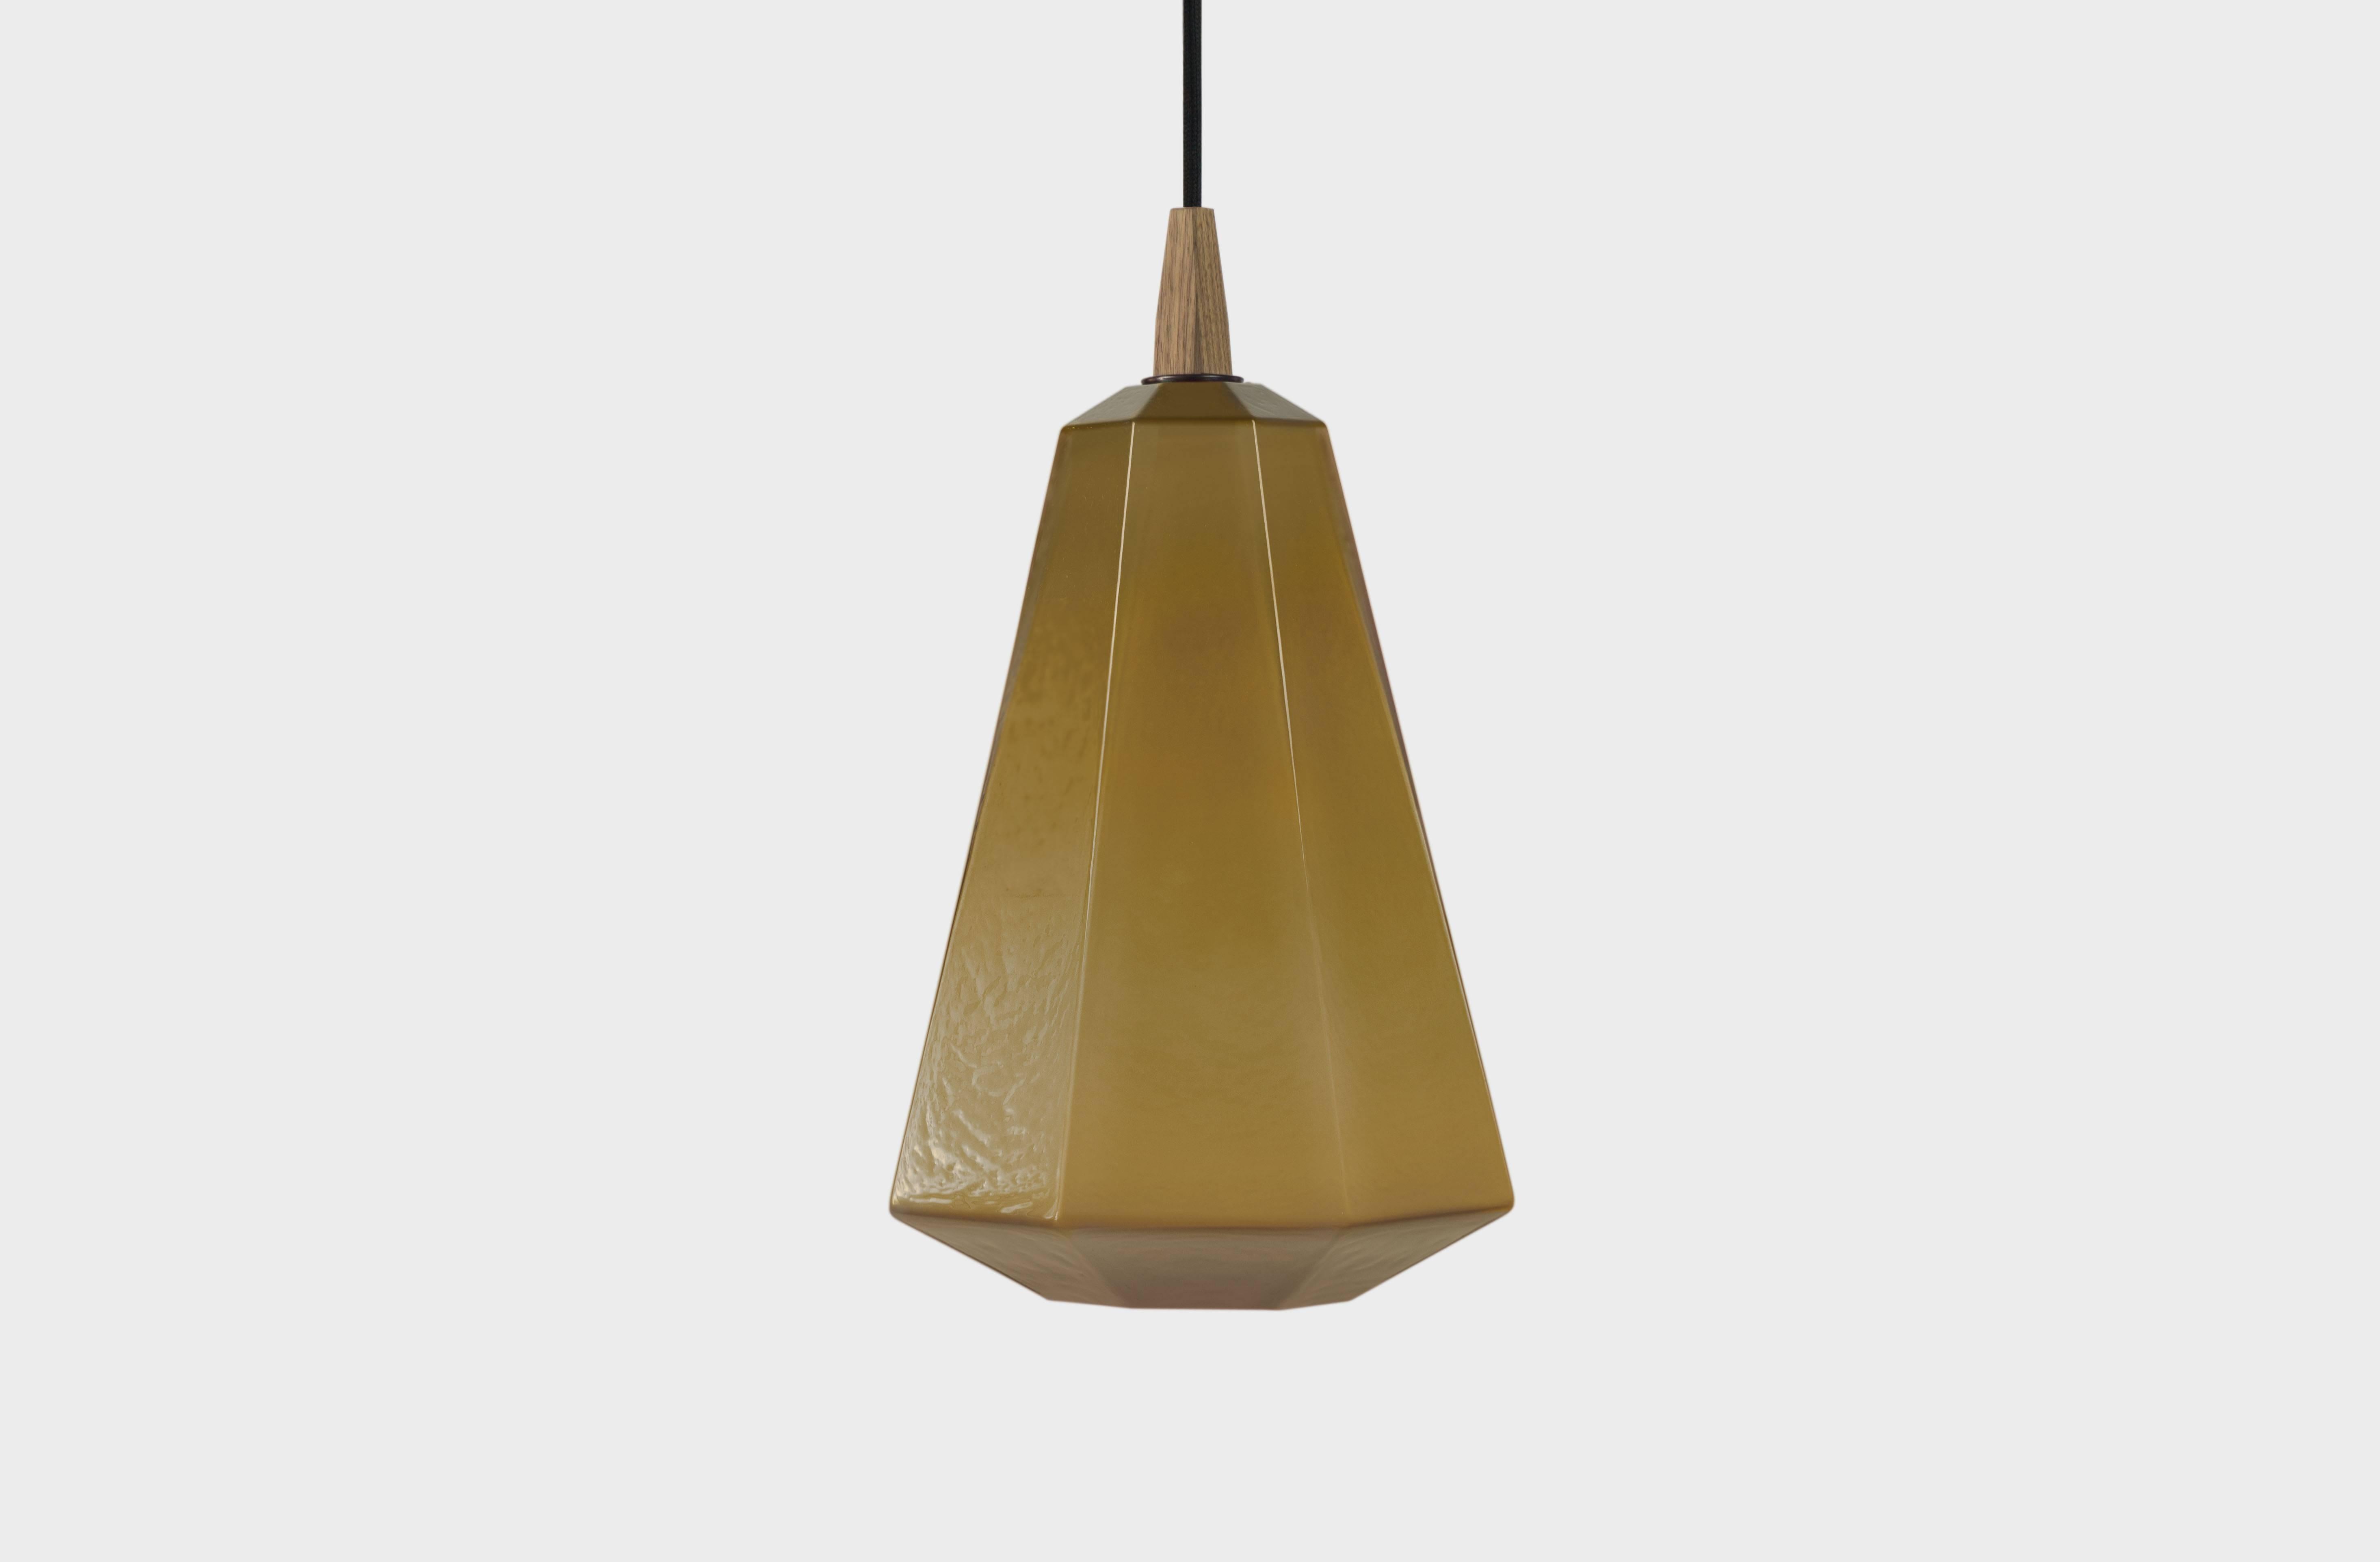 PRIM - 16.5” H x 9” L x 9” W available in six colors. Cream, caramel, lagoon, ruby, sky, slate and tourmaline. 

The Poly Pop Pendant Collection gives geometrically ridged architectural structure to common organic forms. Drawing inspiration from